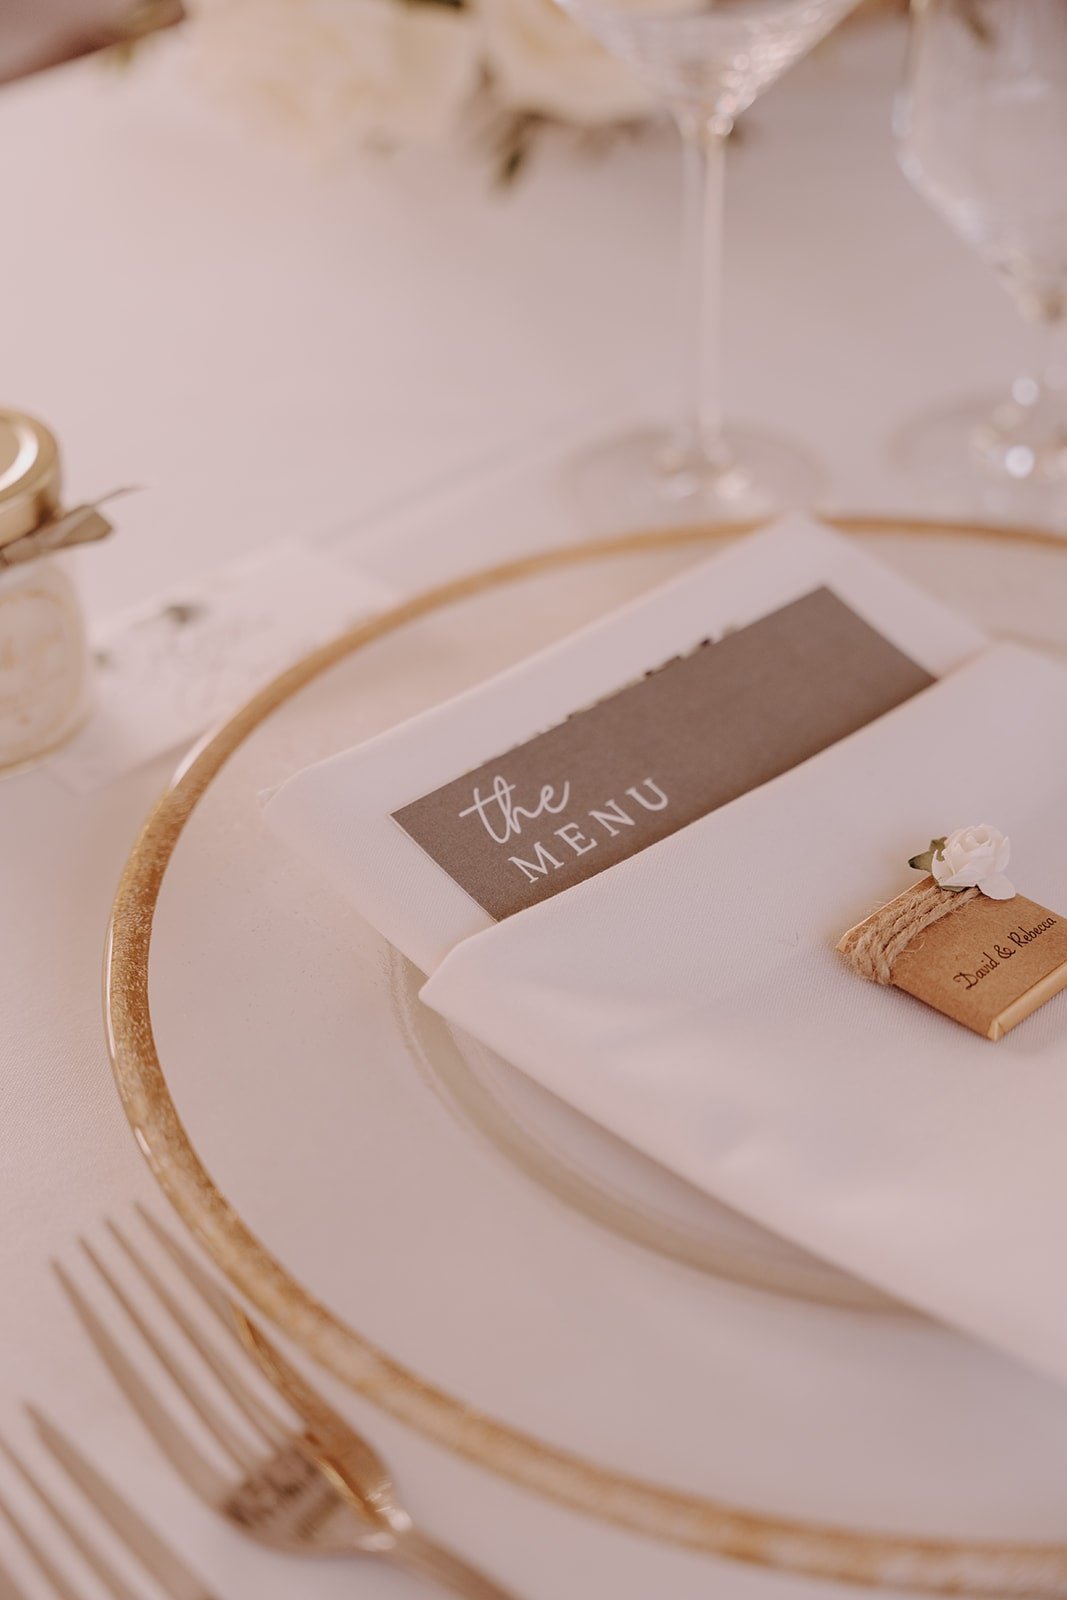 White dinner plate with printed menu at Lairmont Manor wedding